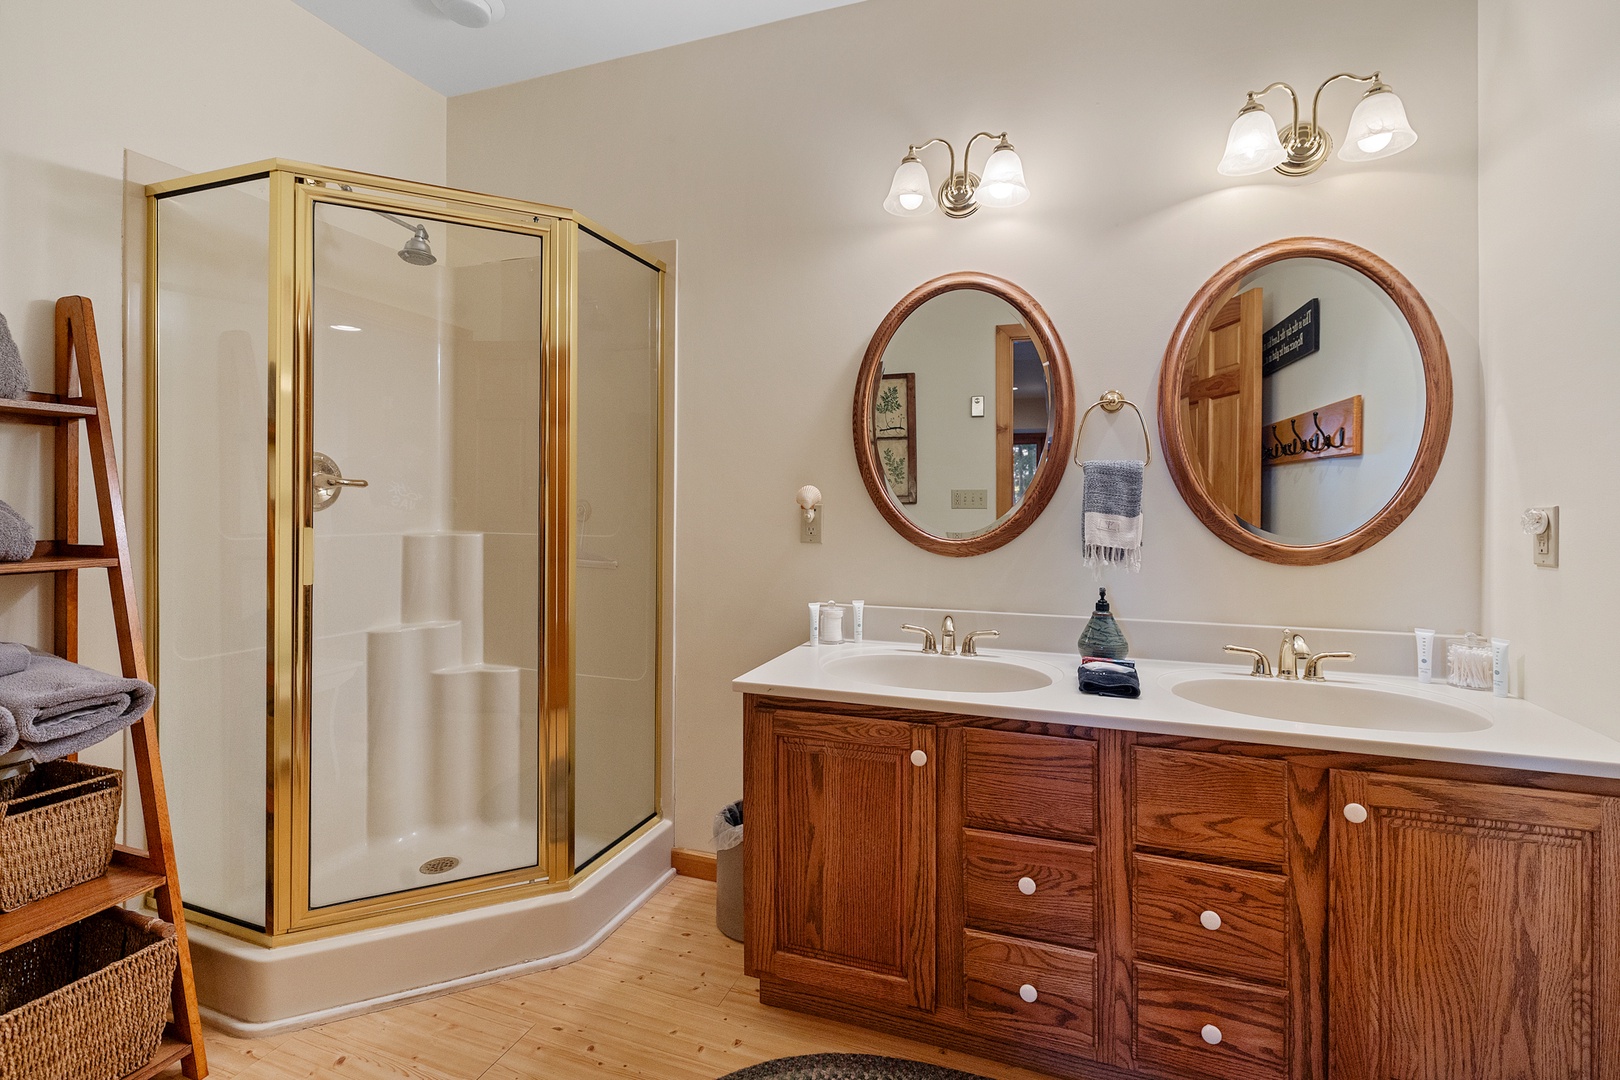 Make your group stay more convenient with this bathroom’s amenities.